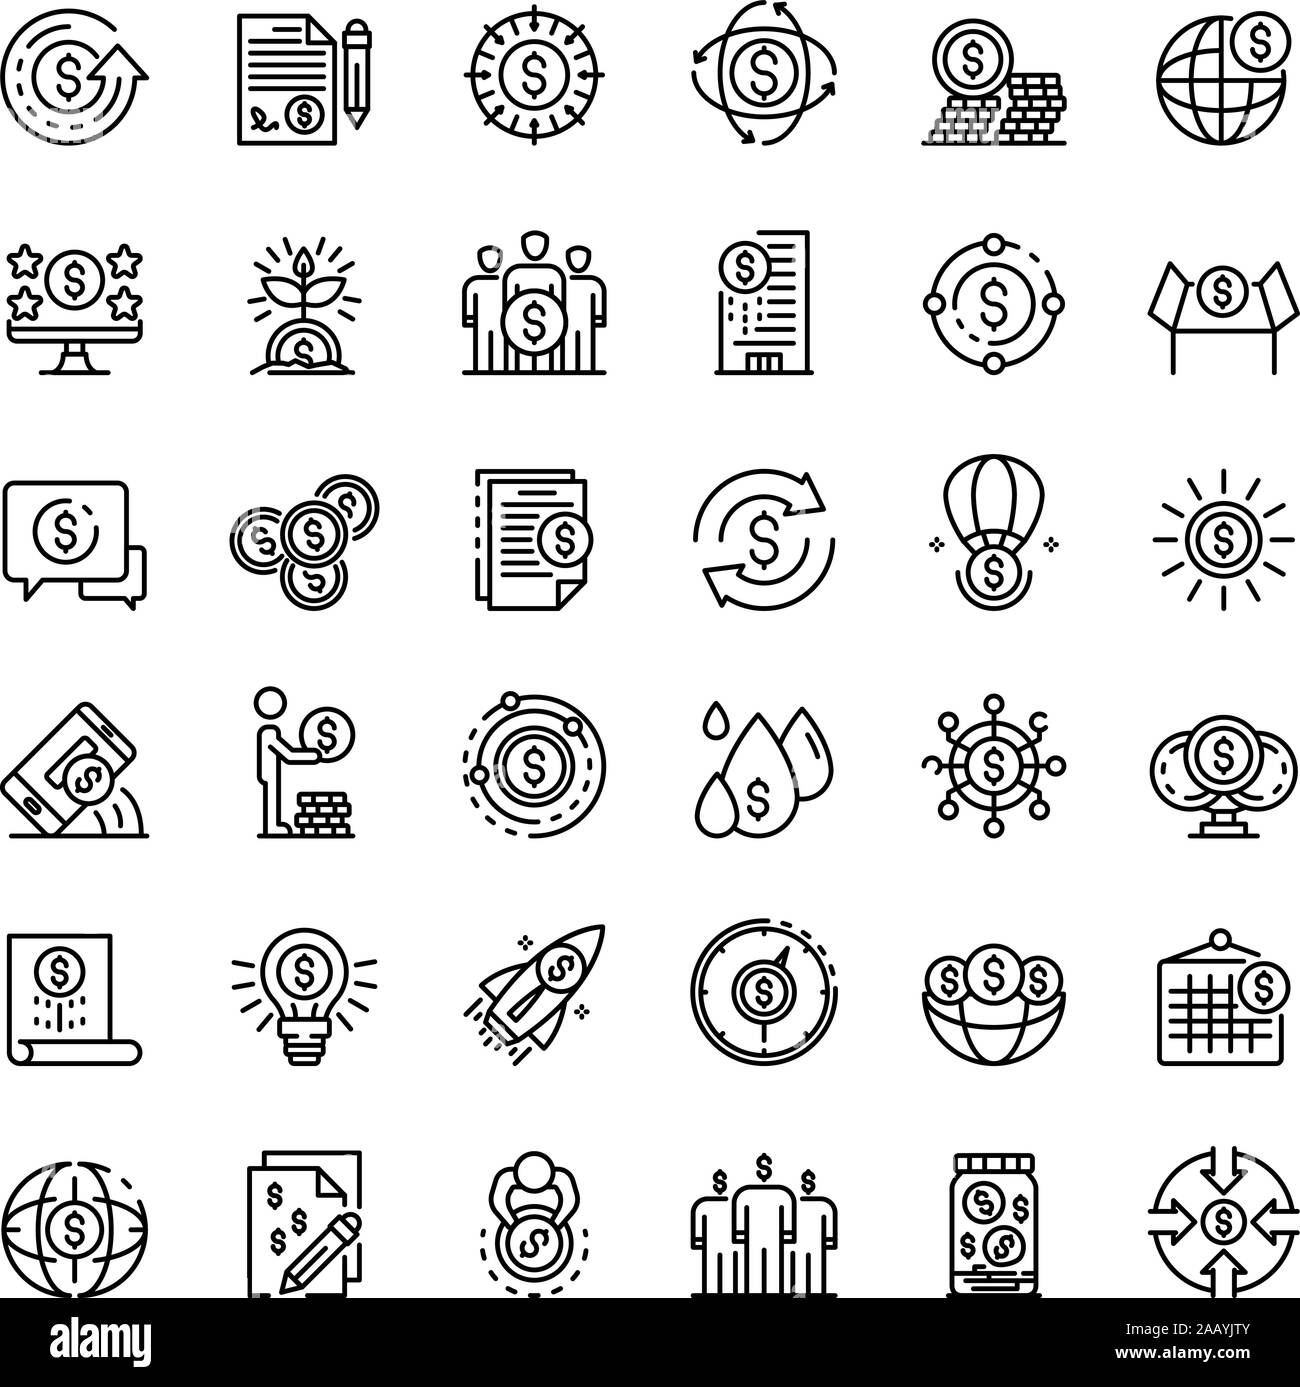 Crowdfunding platform icons set, outline style Stock Vector